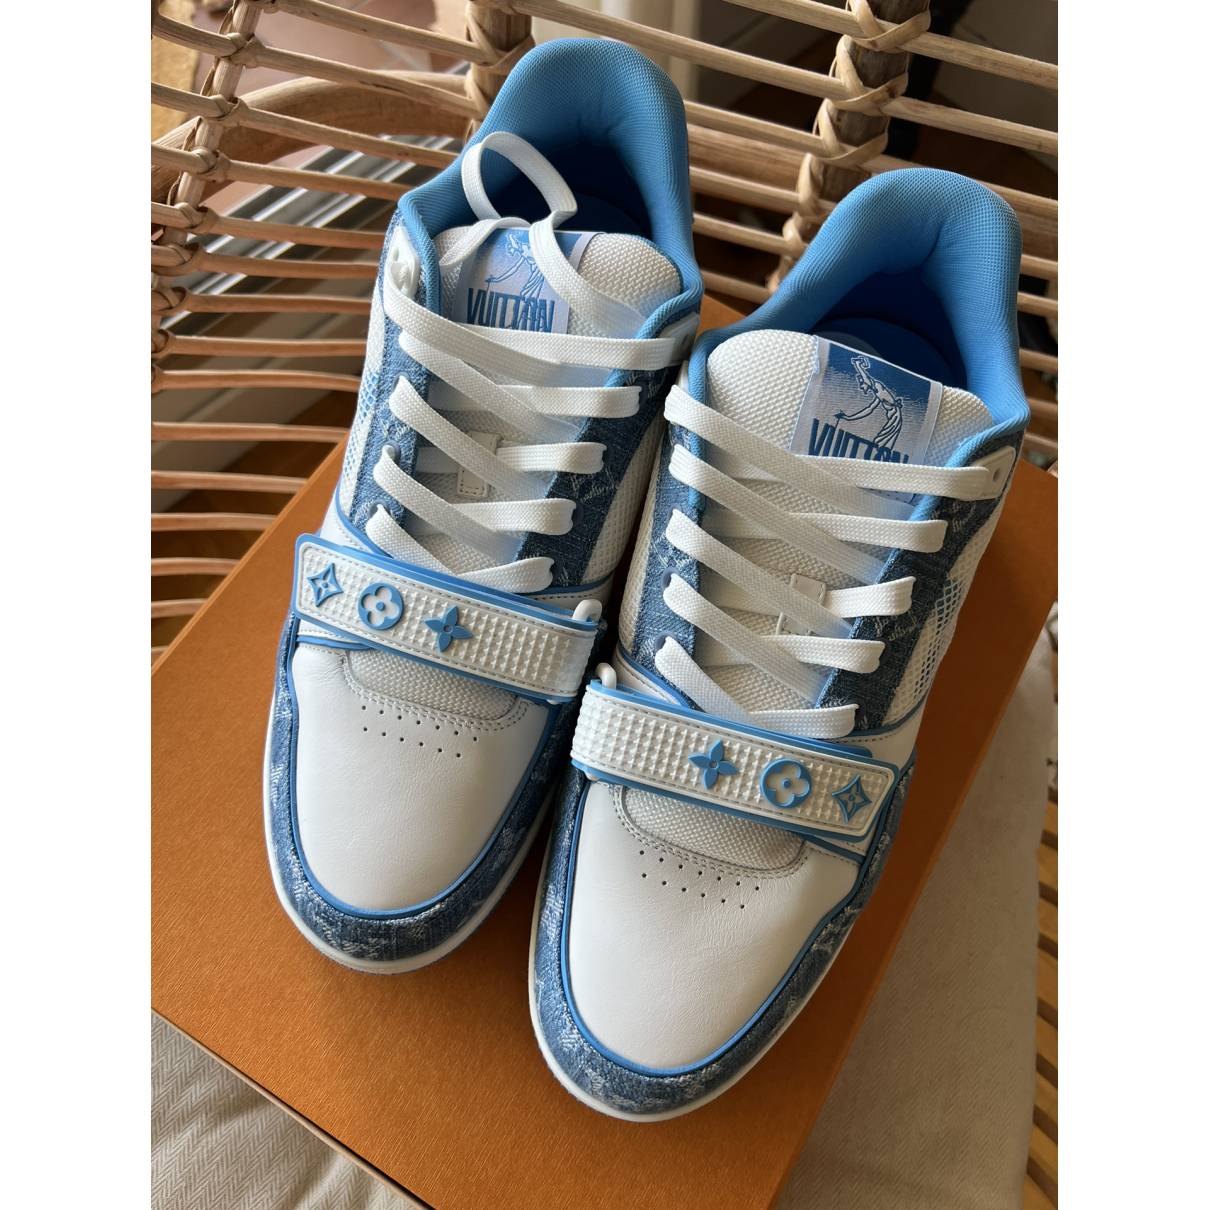 Lv trainer leather low trainers Louis Vuitton Blue size 9 UK in